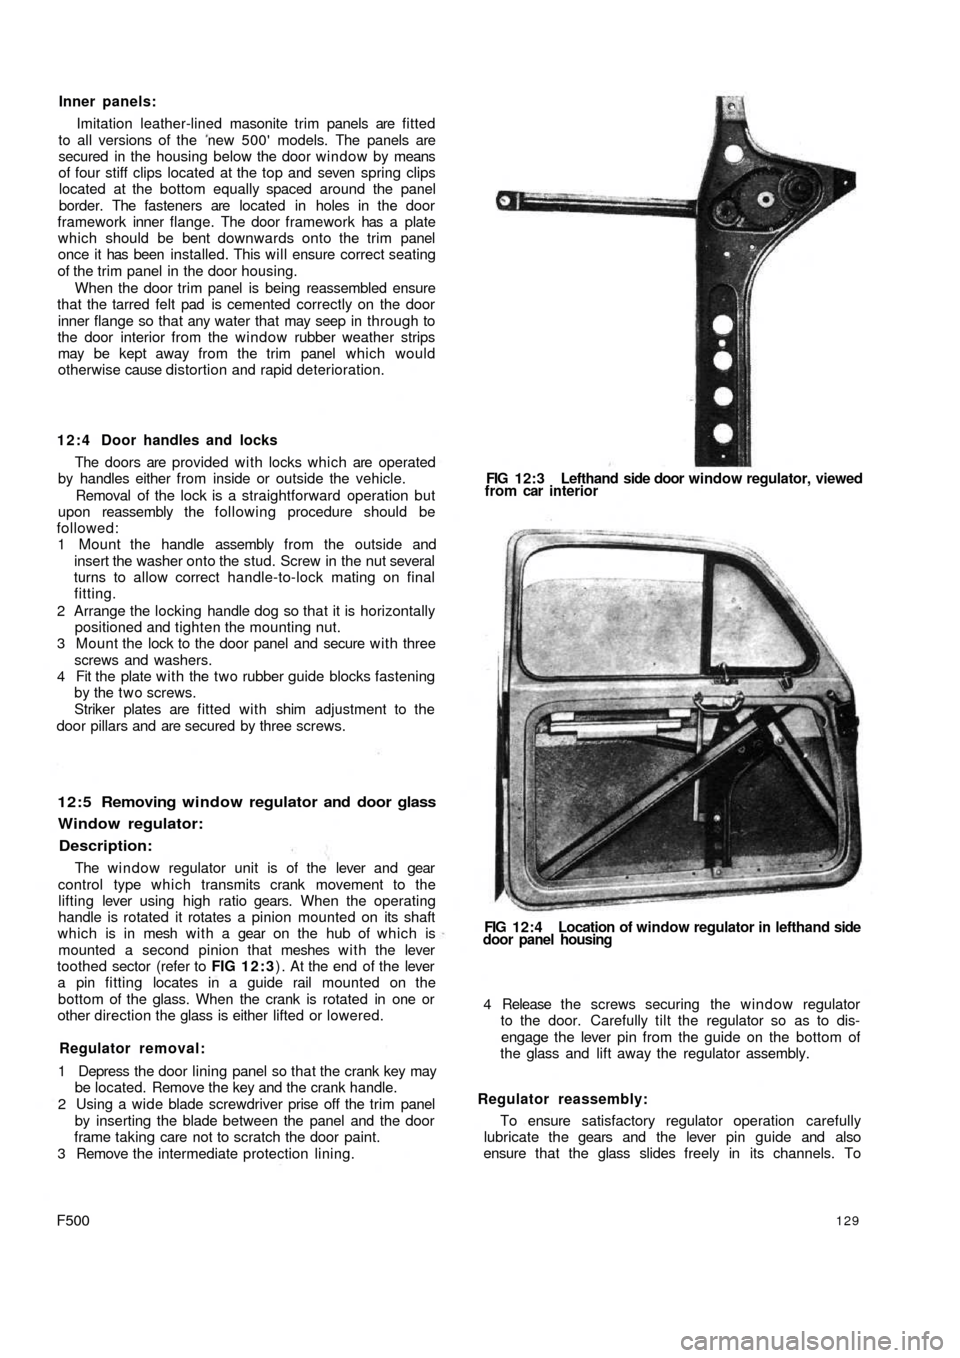 FIAT 500 1959 1.G Workshop Manual Inner panels:
Imitation leather-lined masonite trim panels are fitted
to all versions of the  new 500 models. The panels are
secured in the housing below the door window by means
of four stiff clips 